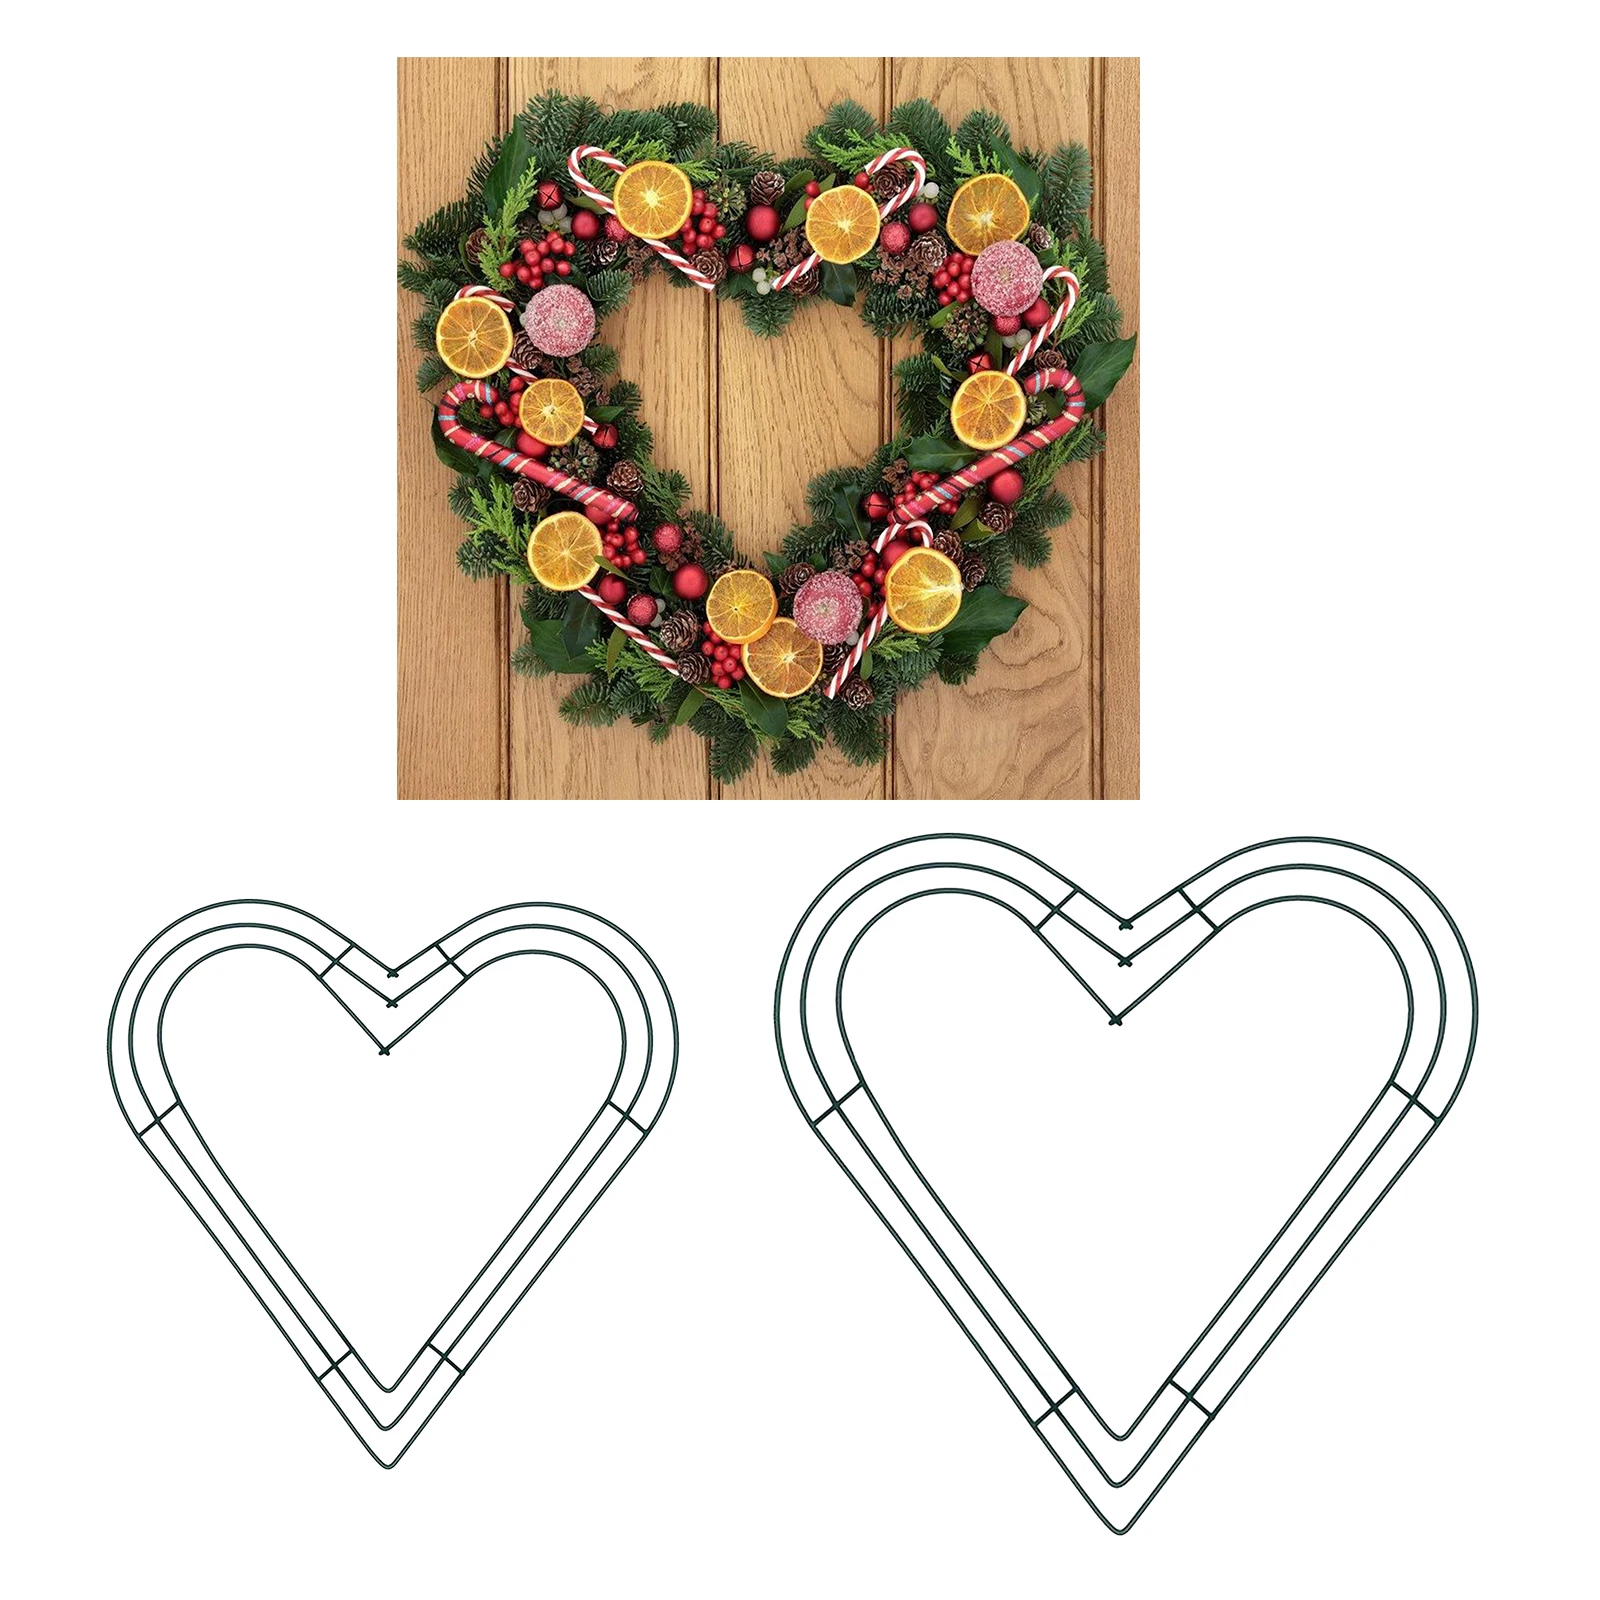 Metal Wreath Frame Ring Heart Shaped DIY Macrame Floral Crafts Wire Wreath Form Christmas Decoration Door Crafts